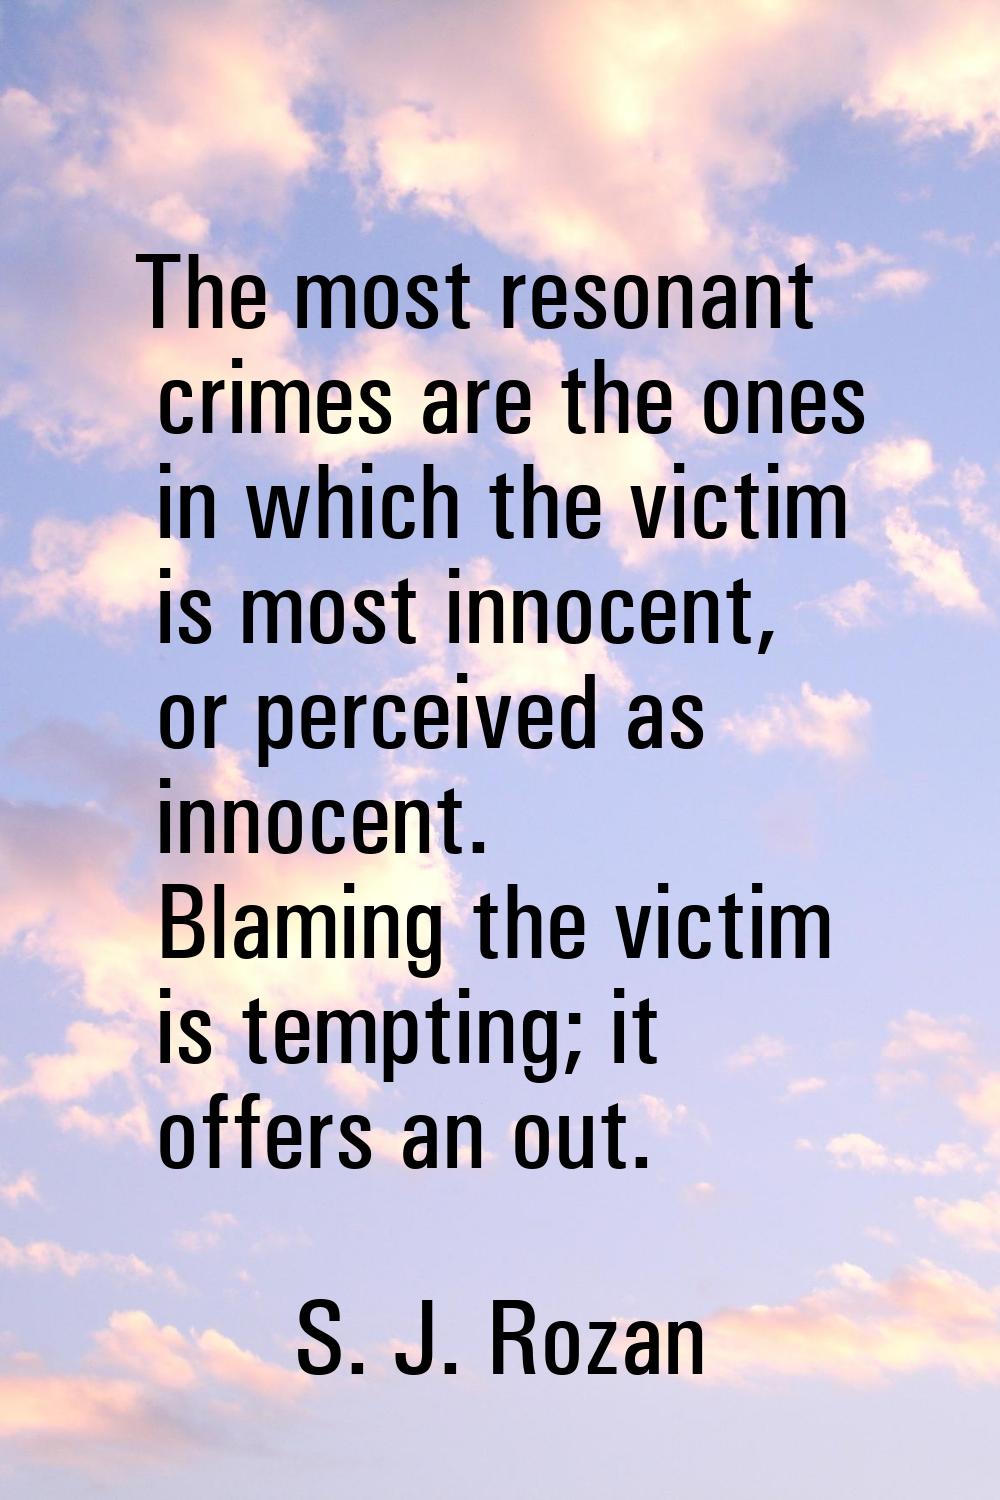 The most resonant crimes are the ones in which the victim is most innocent, or perceived as innocen